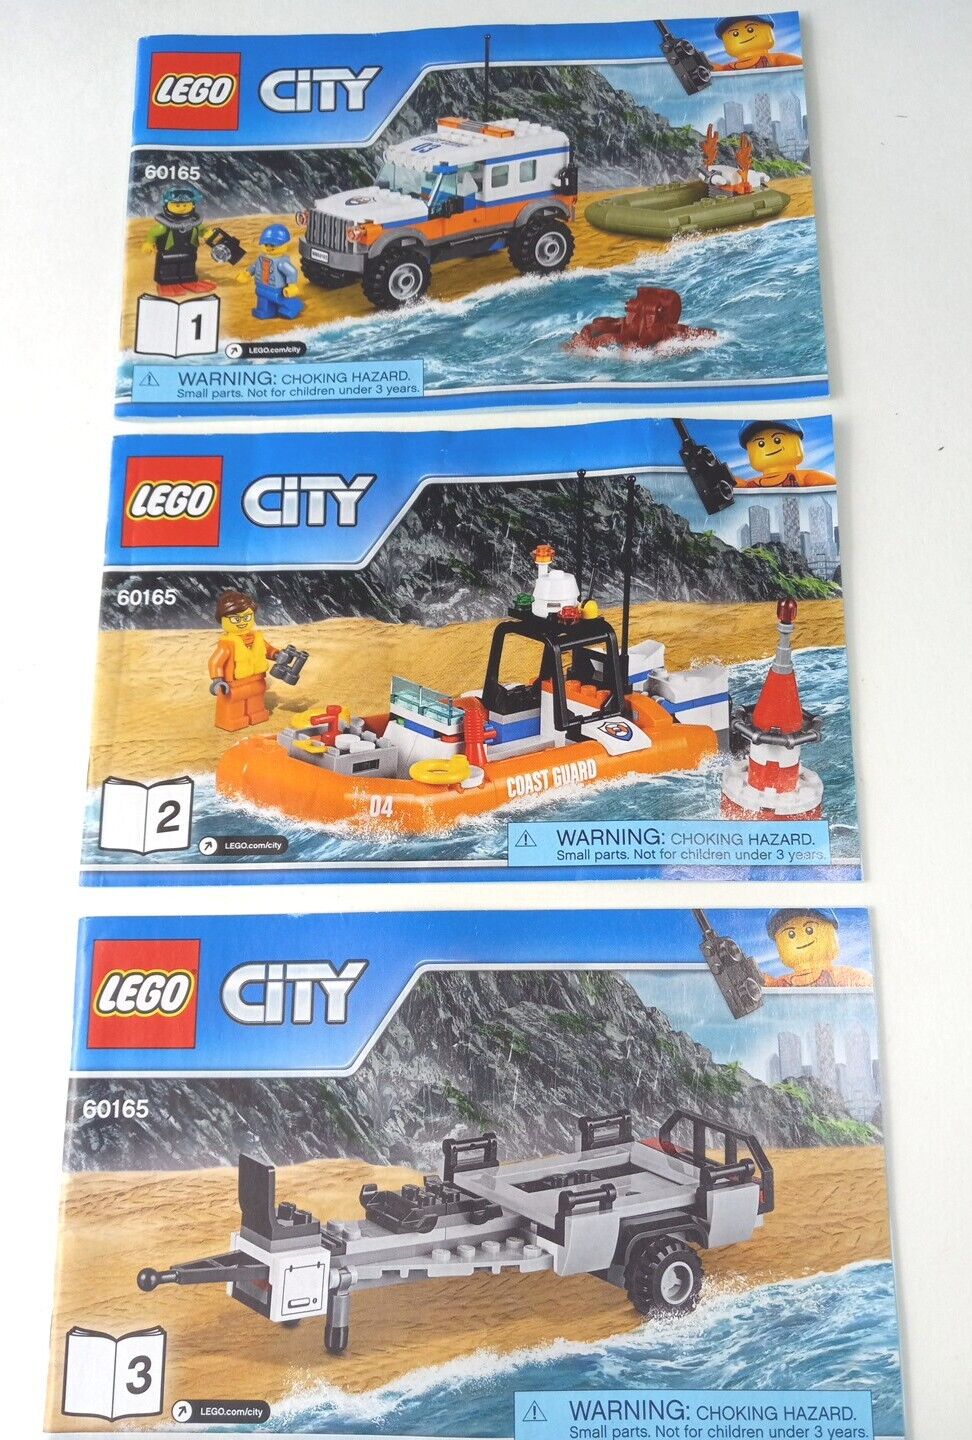 Lego Lot Of 3 Manuals City # 60165 Books 1, 2 And 3 Manuals Only